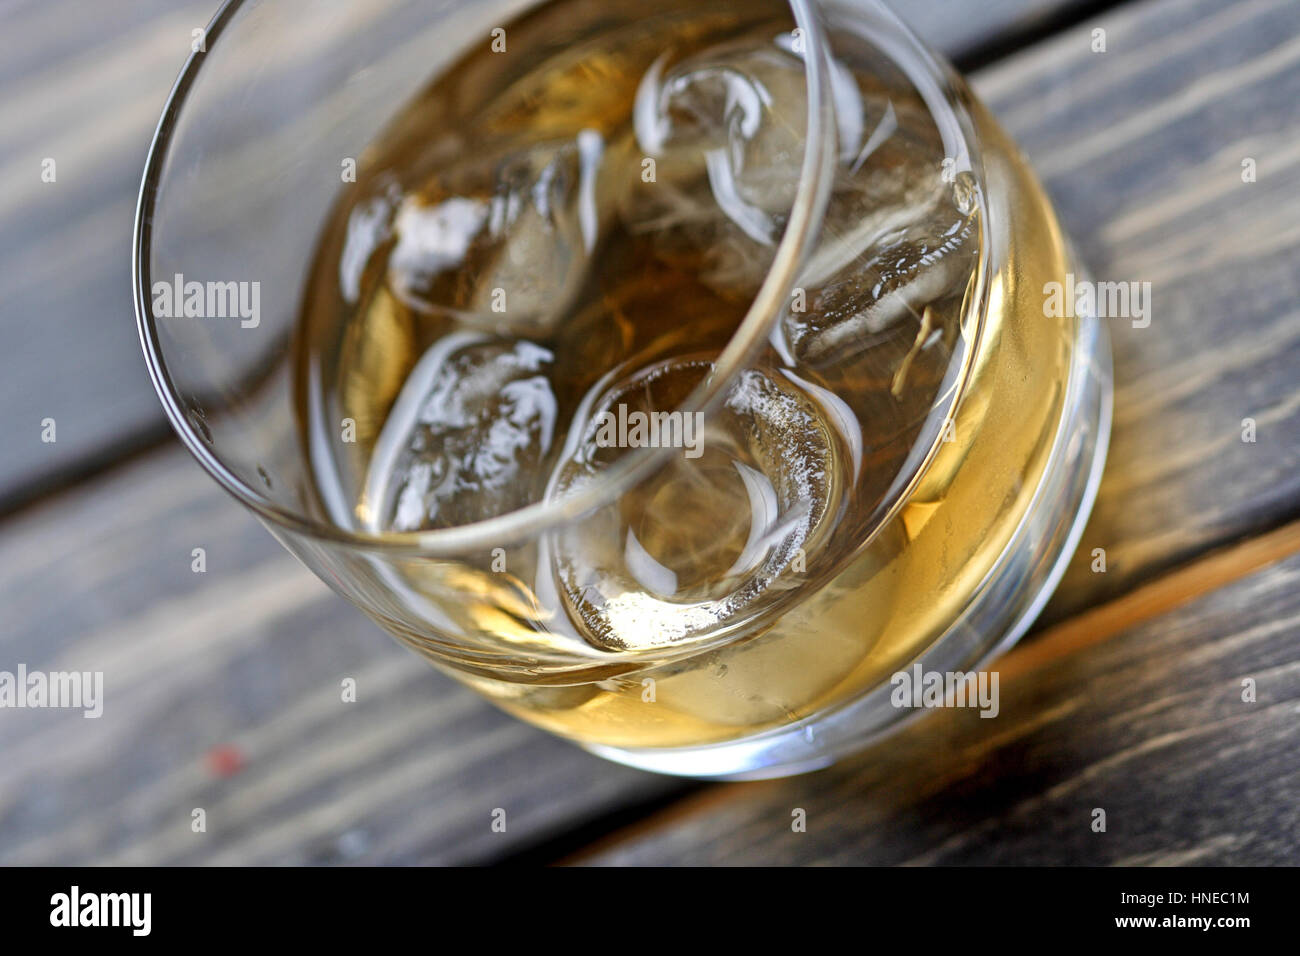 Close-up of whisky glass Stock Photo